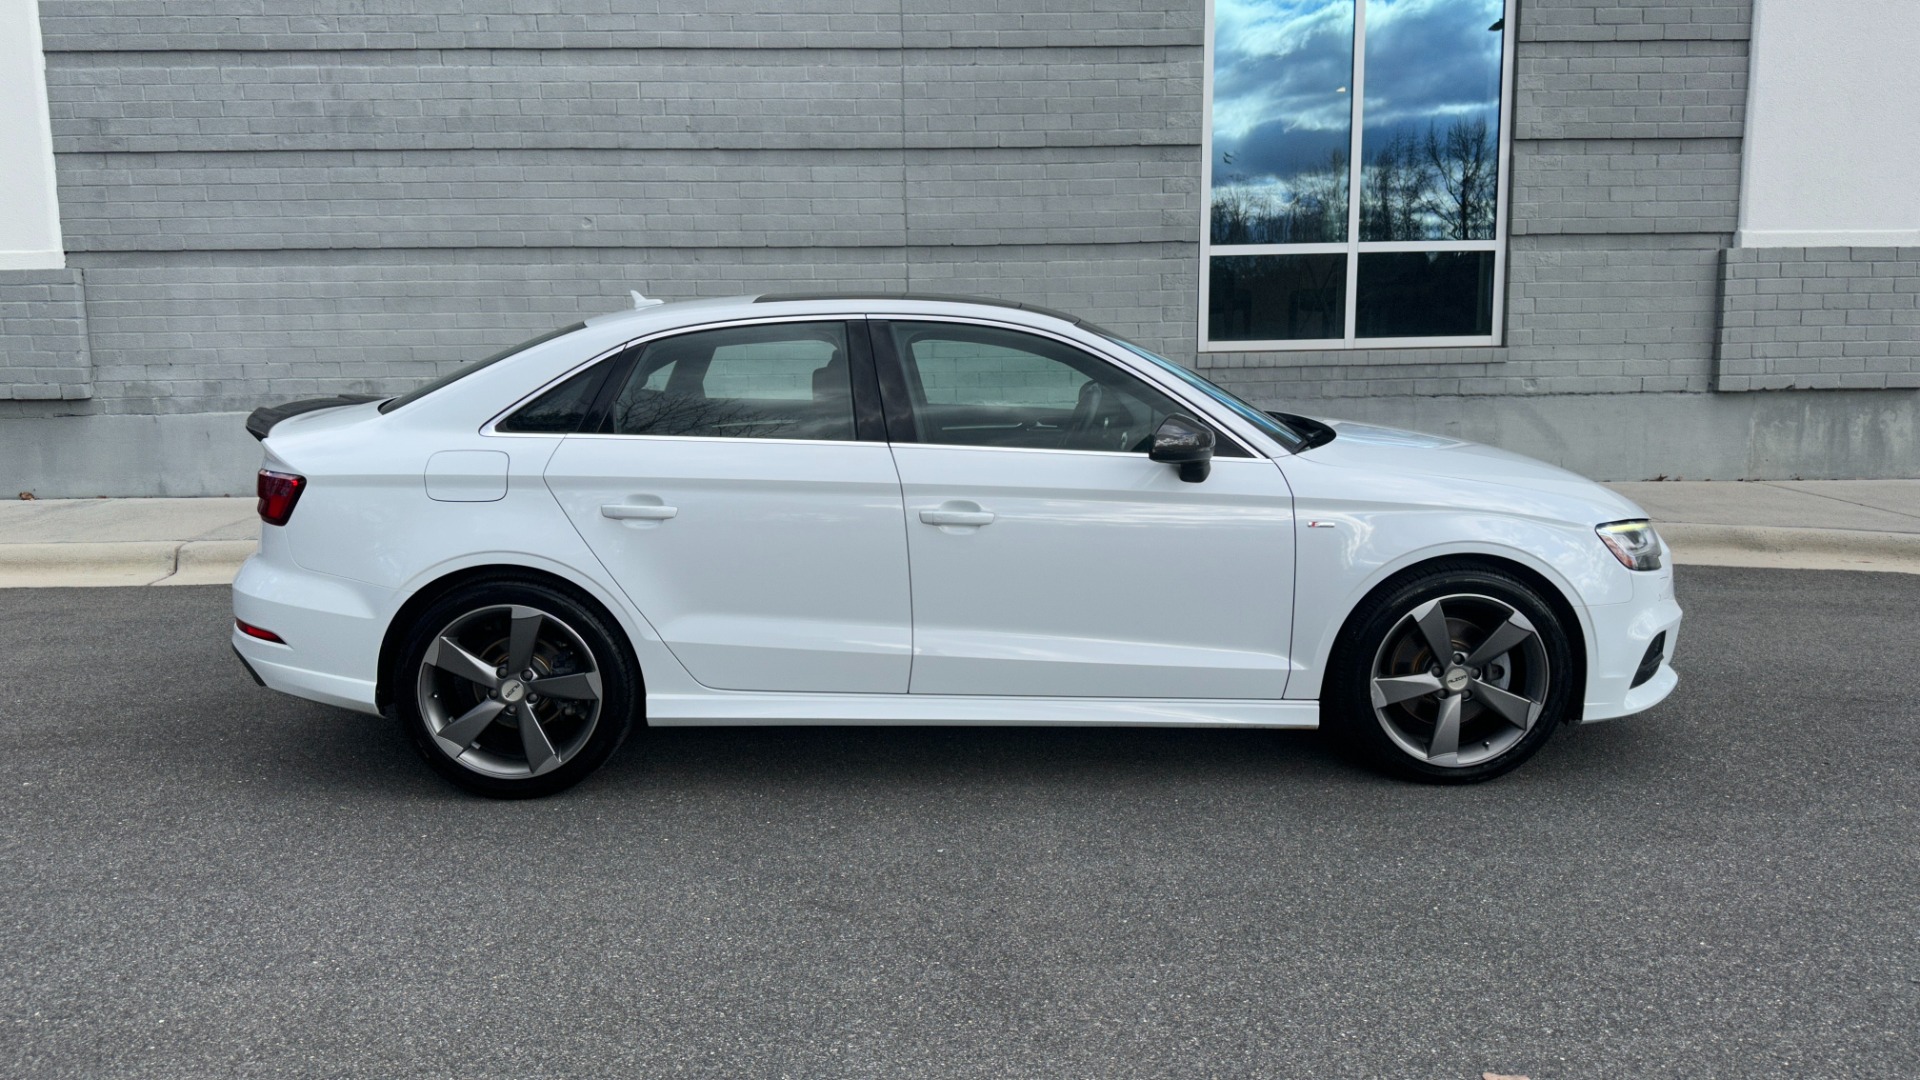 Used 2017 Audi A3 Sedan PREMIUM PLUS / SPORT PACKAGE / LIGHT PACKAGE / SPORT SUSPENSION / B&O SOUND for sale $21,995 at Formula Imports in Charlotte NC 28227 7